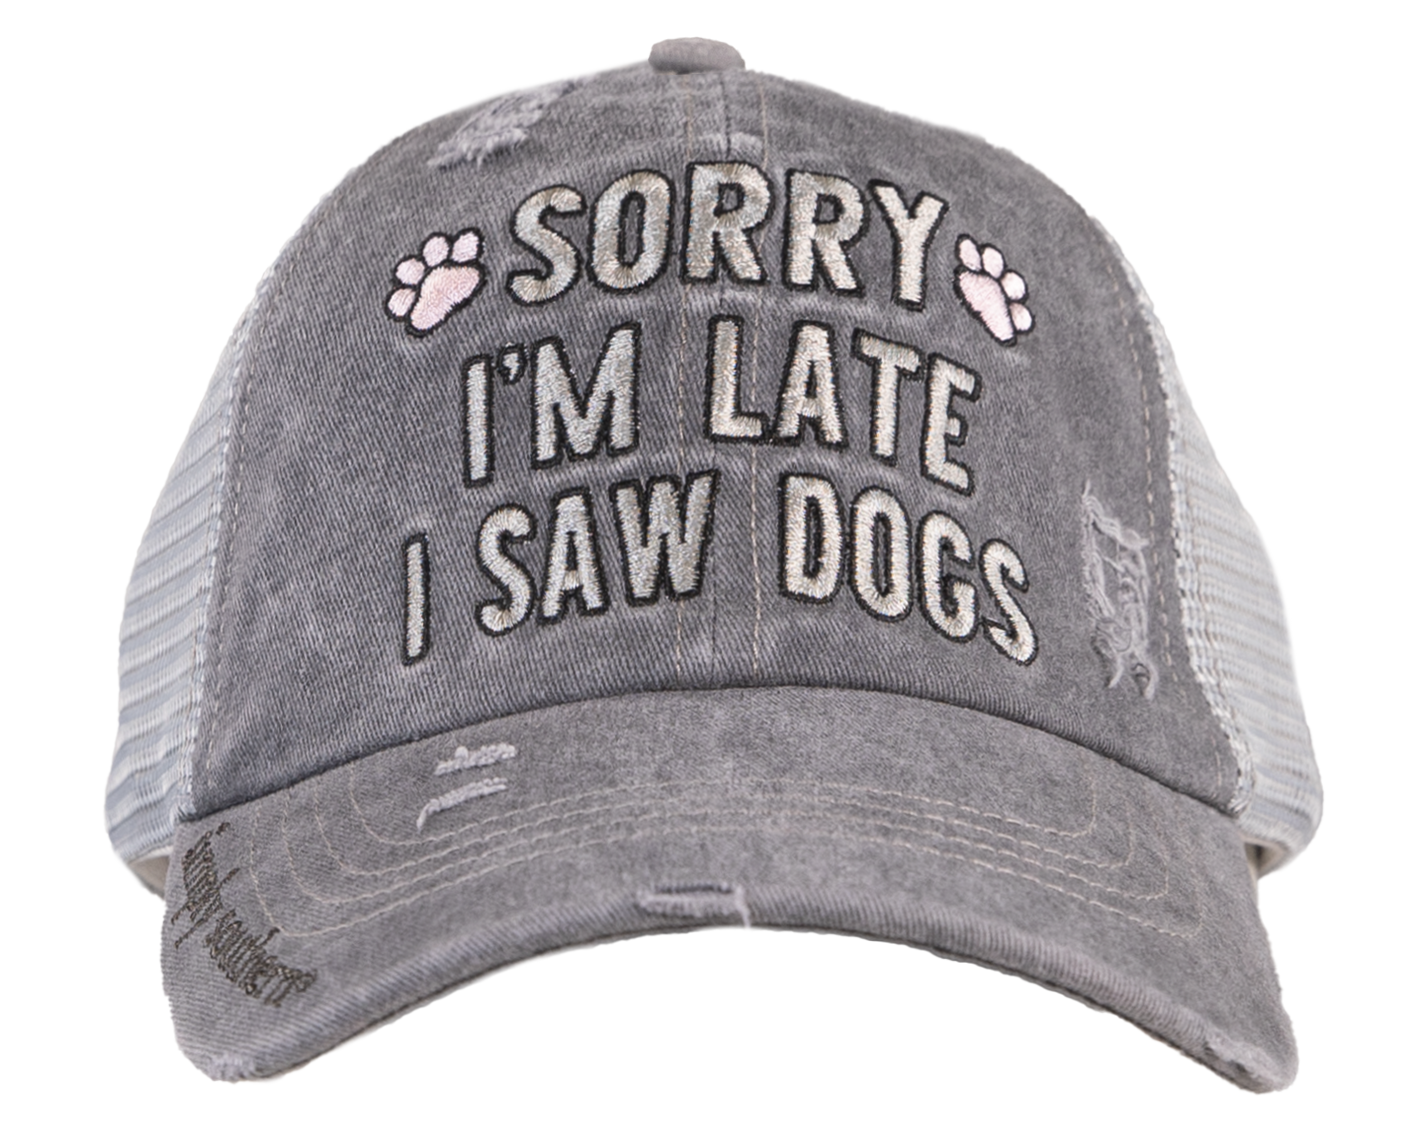 "Sorry I'm Late I Saw Dogs" Hat